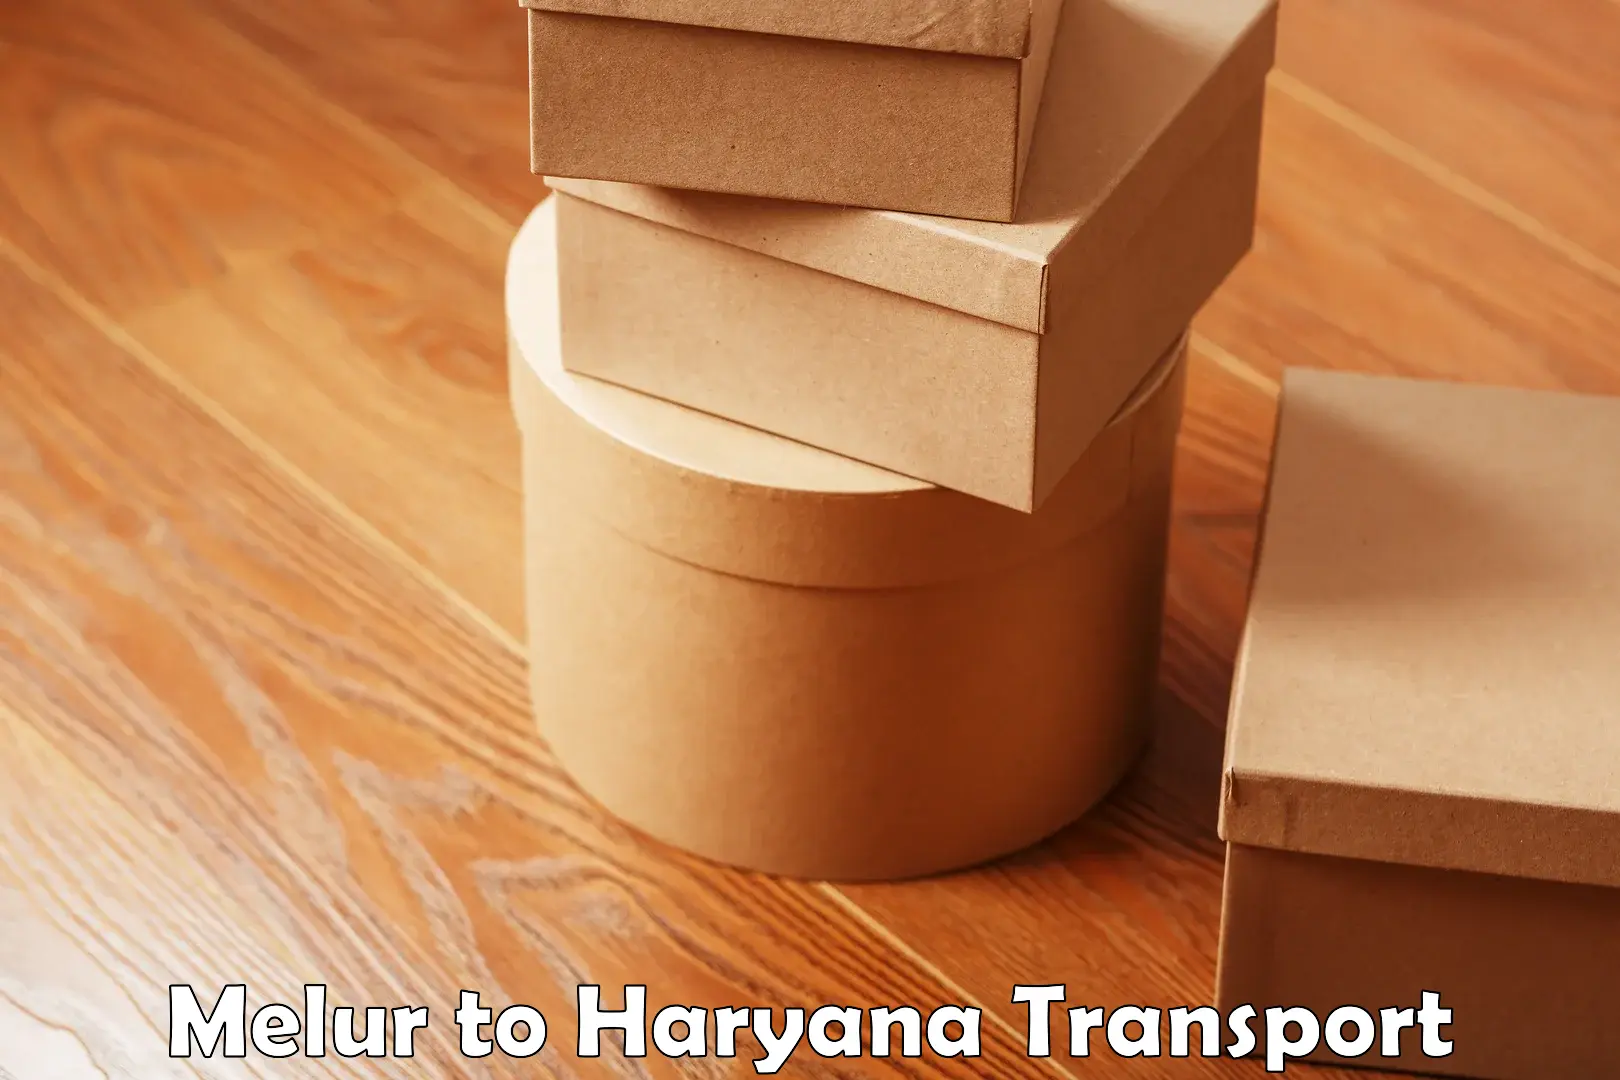 Transport bike from one state to another Melur to NCR Haryana